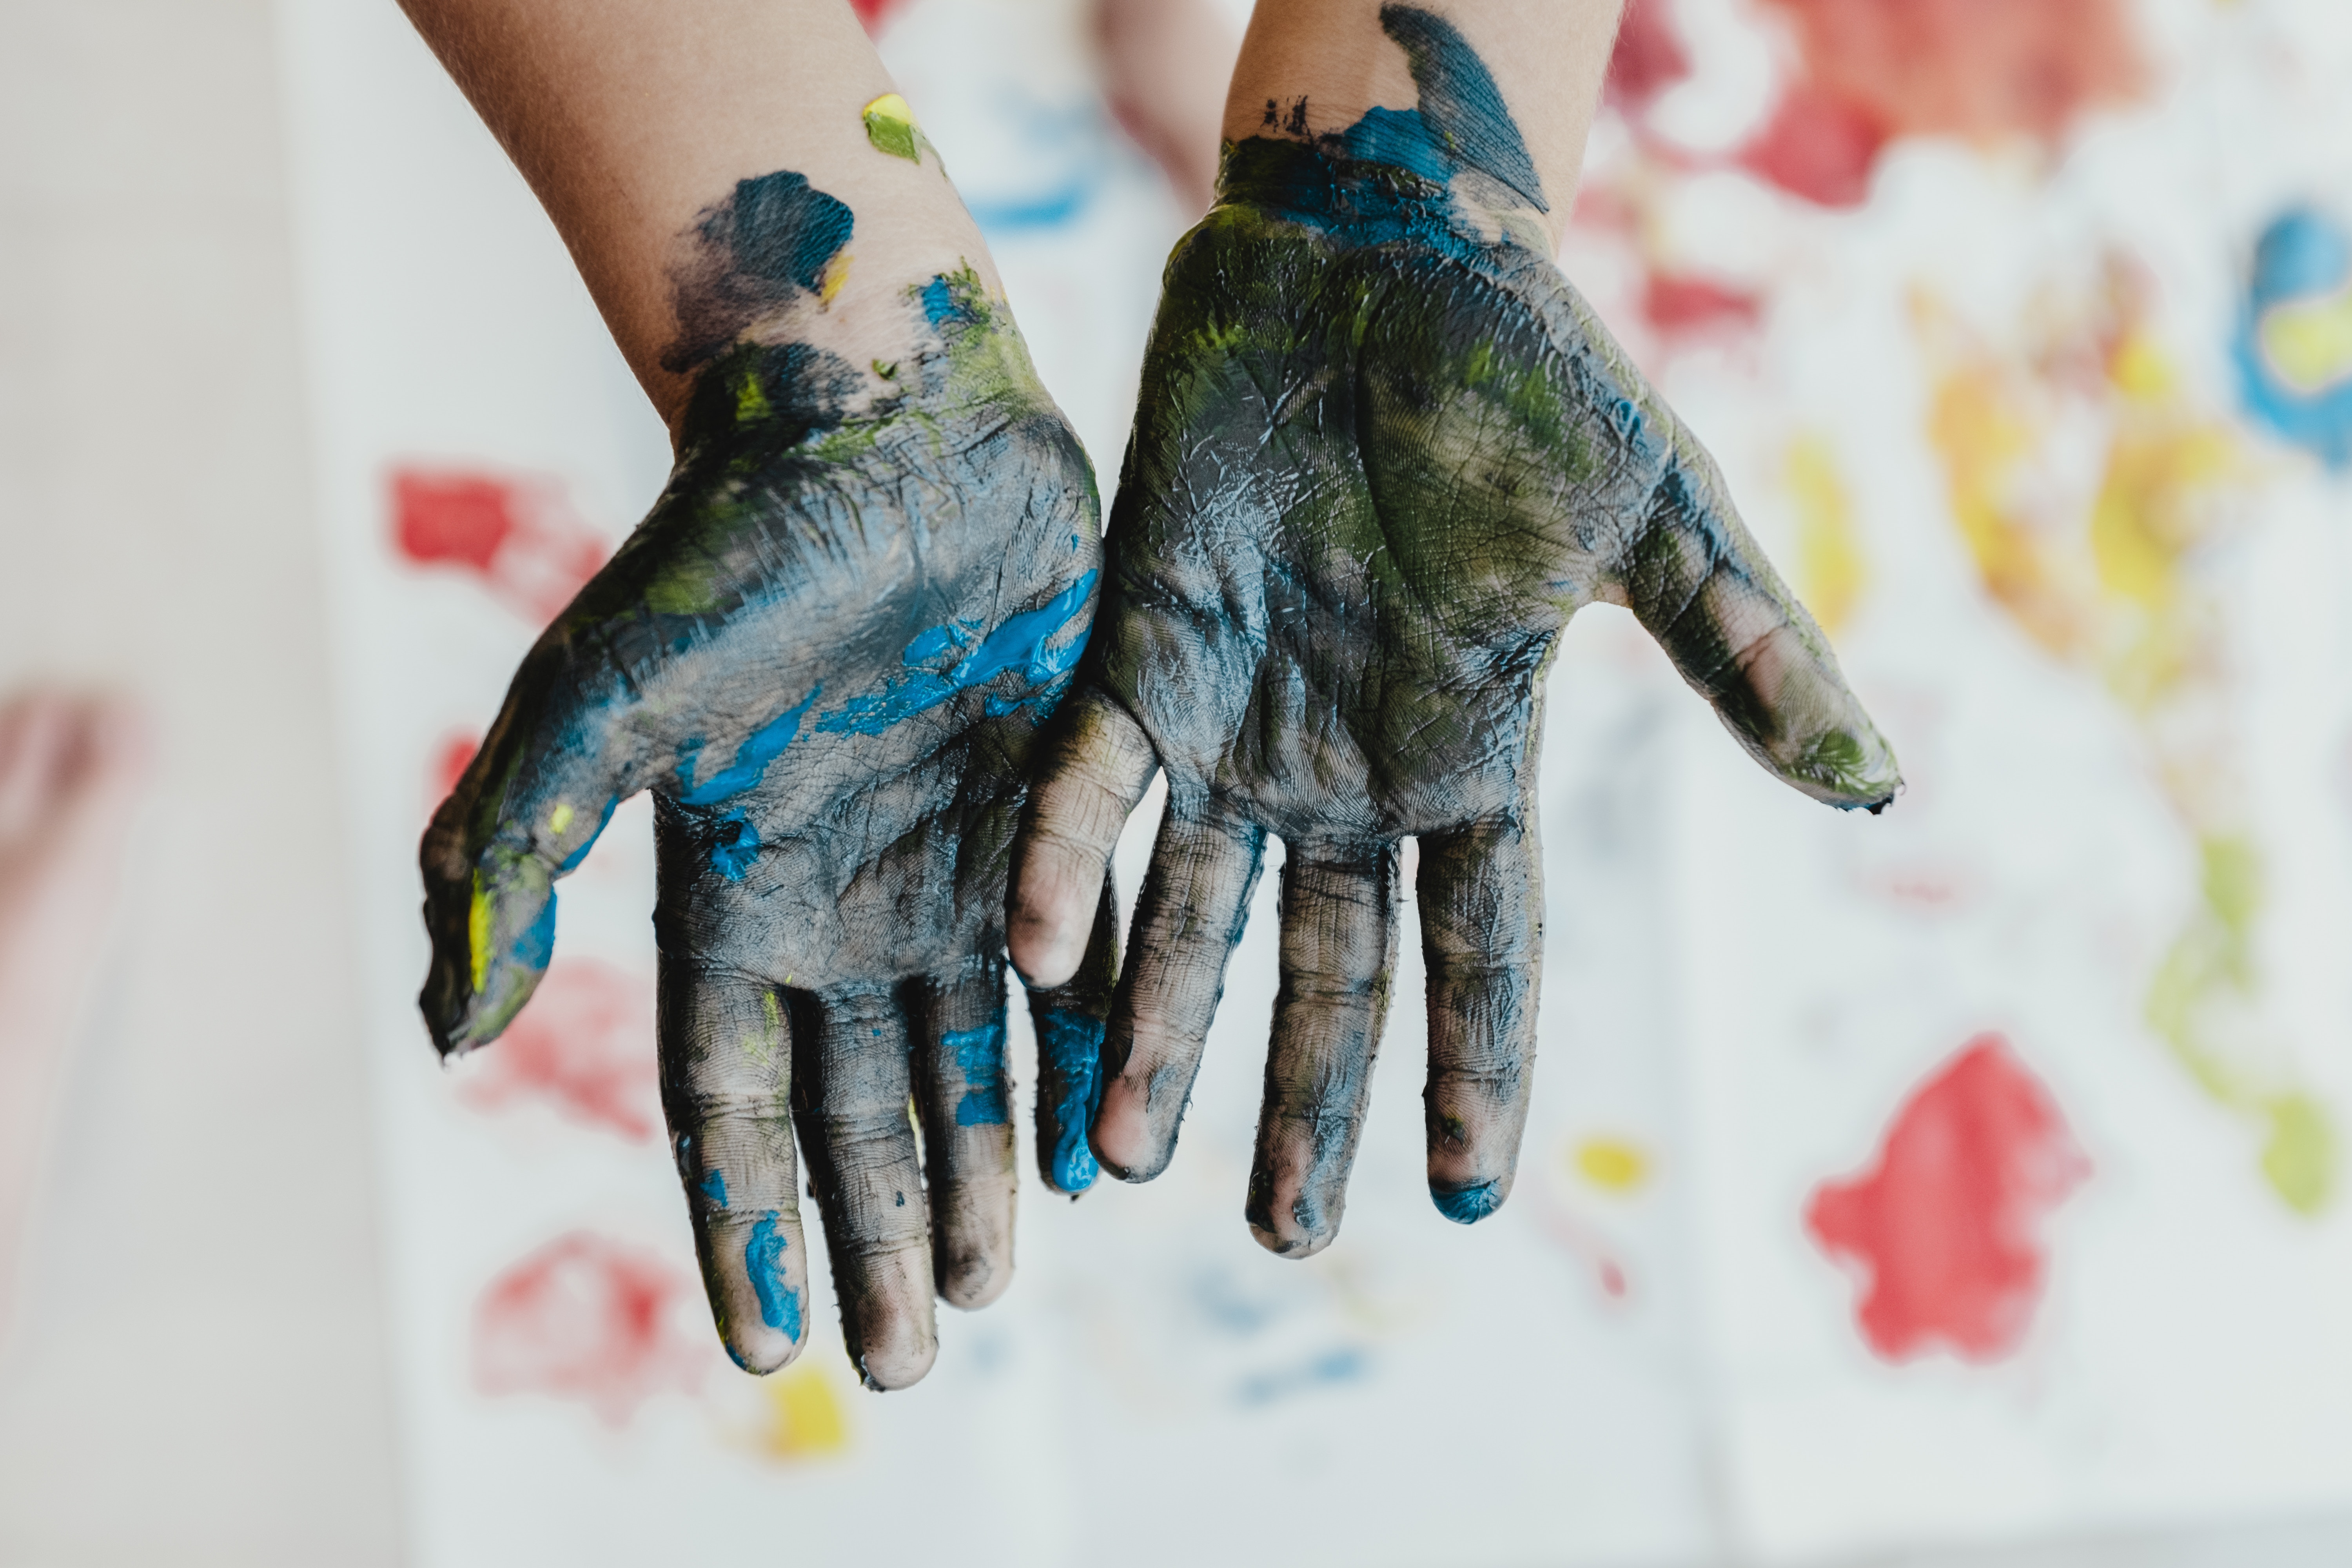 Hands Covered in Paint From Finger Painting